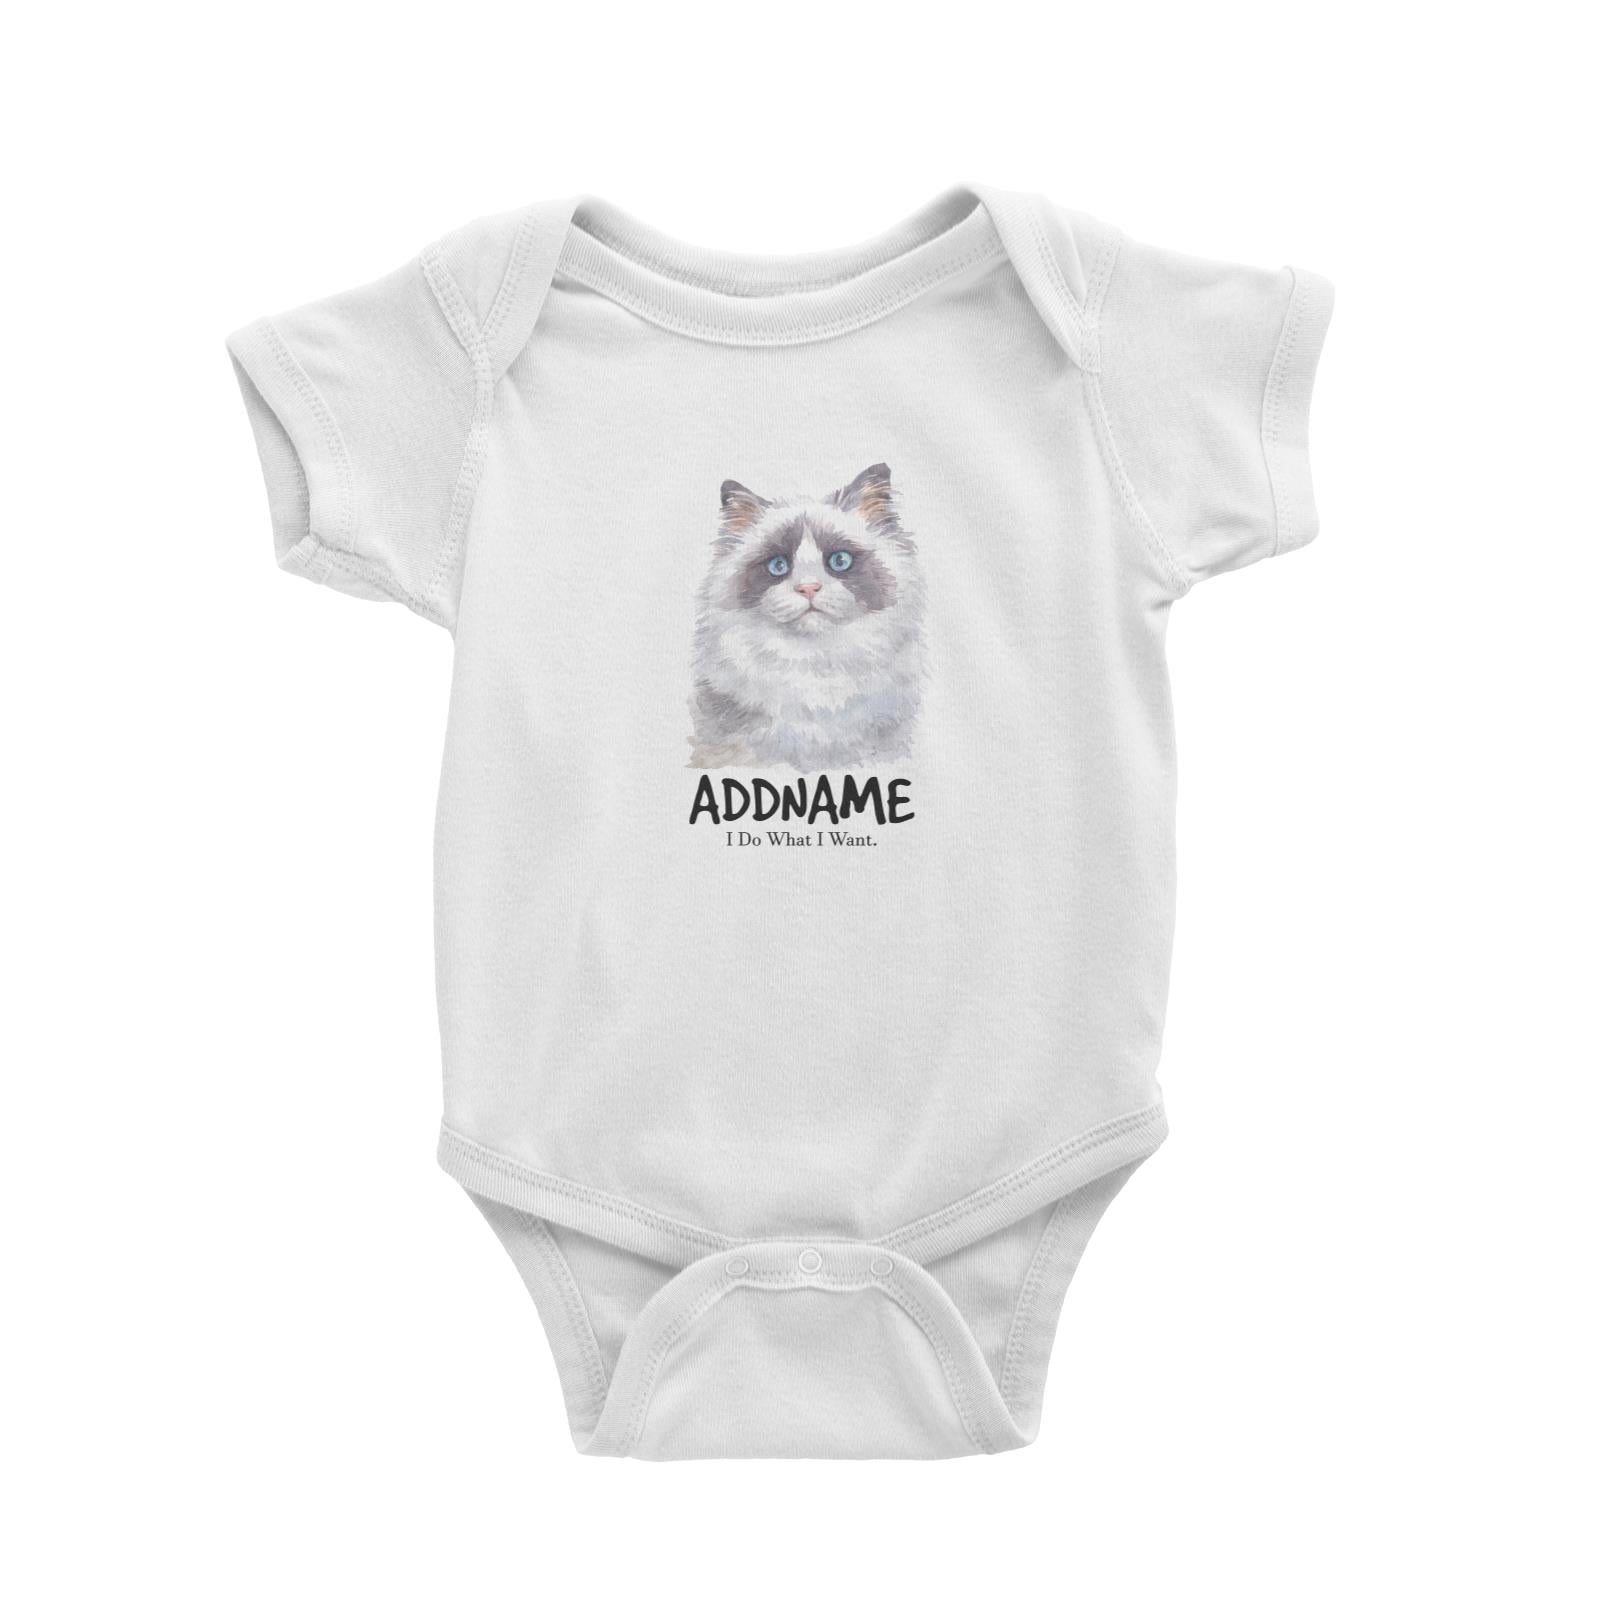 Watercolor Cat Ragdoll Cat Dark Eyes I Do What I Want Addname Baby Romper